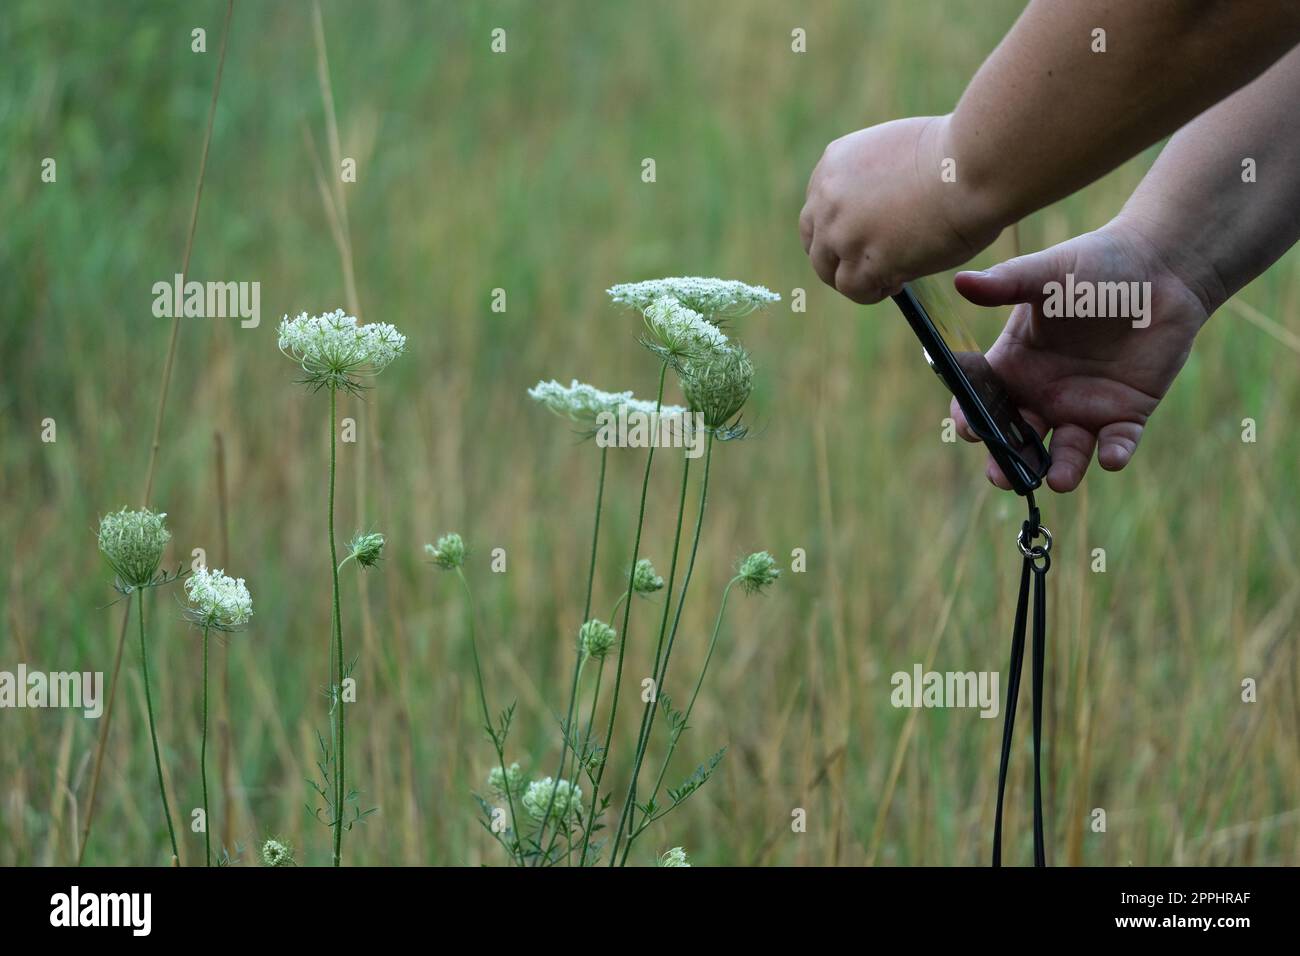 Hands hold a smartphone and take pictures of the small flowers of Daucus carota. Stock Photo